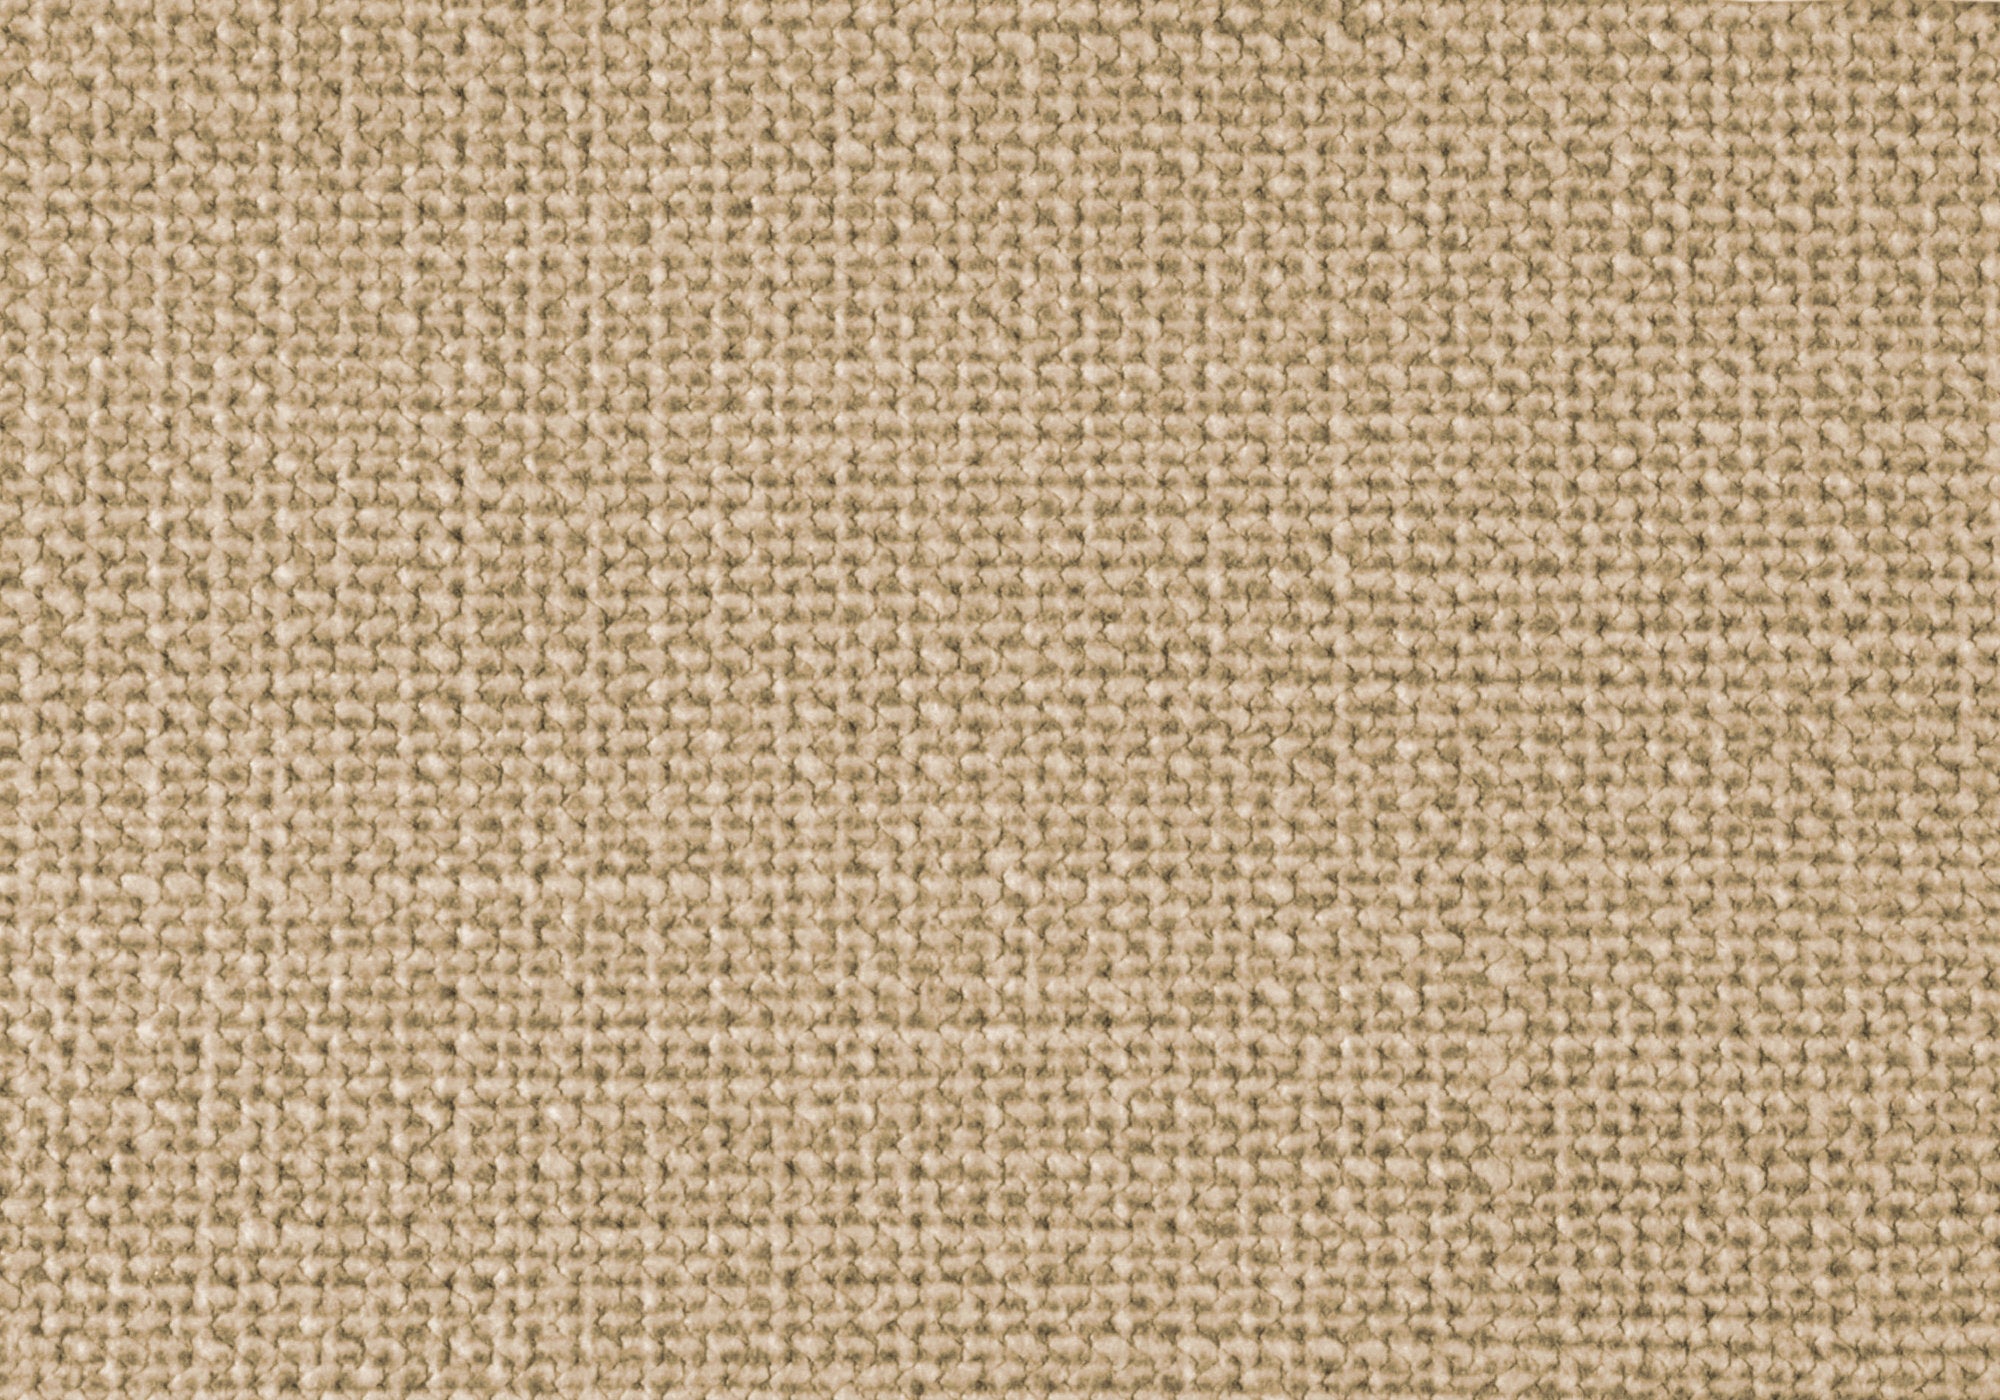 Accent Chair - Beige Fabric